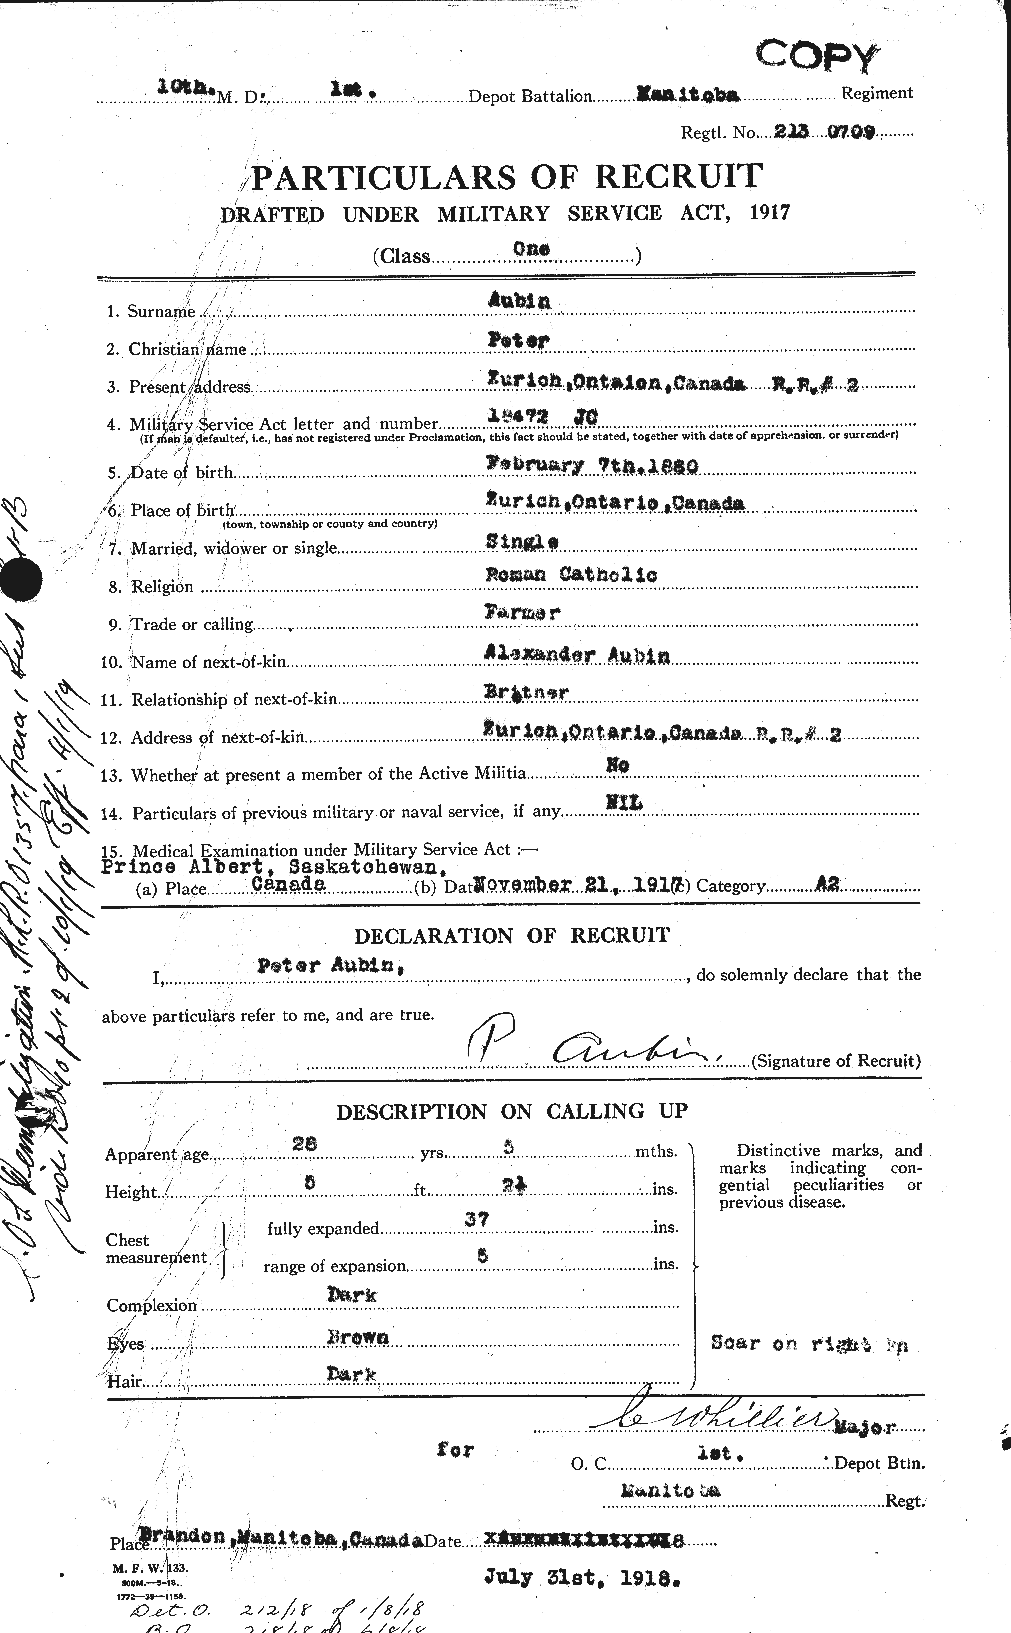 Personnel Records of the First World War - CEF 224701a